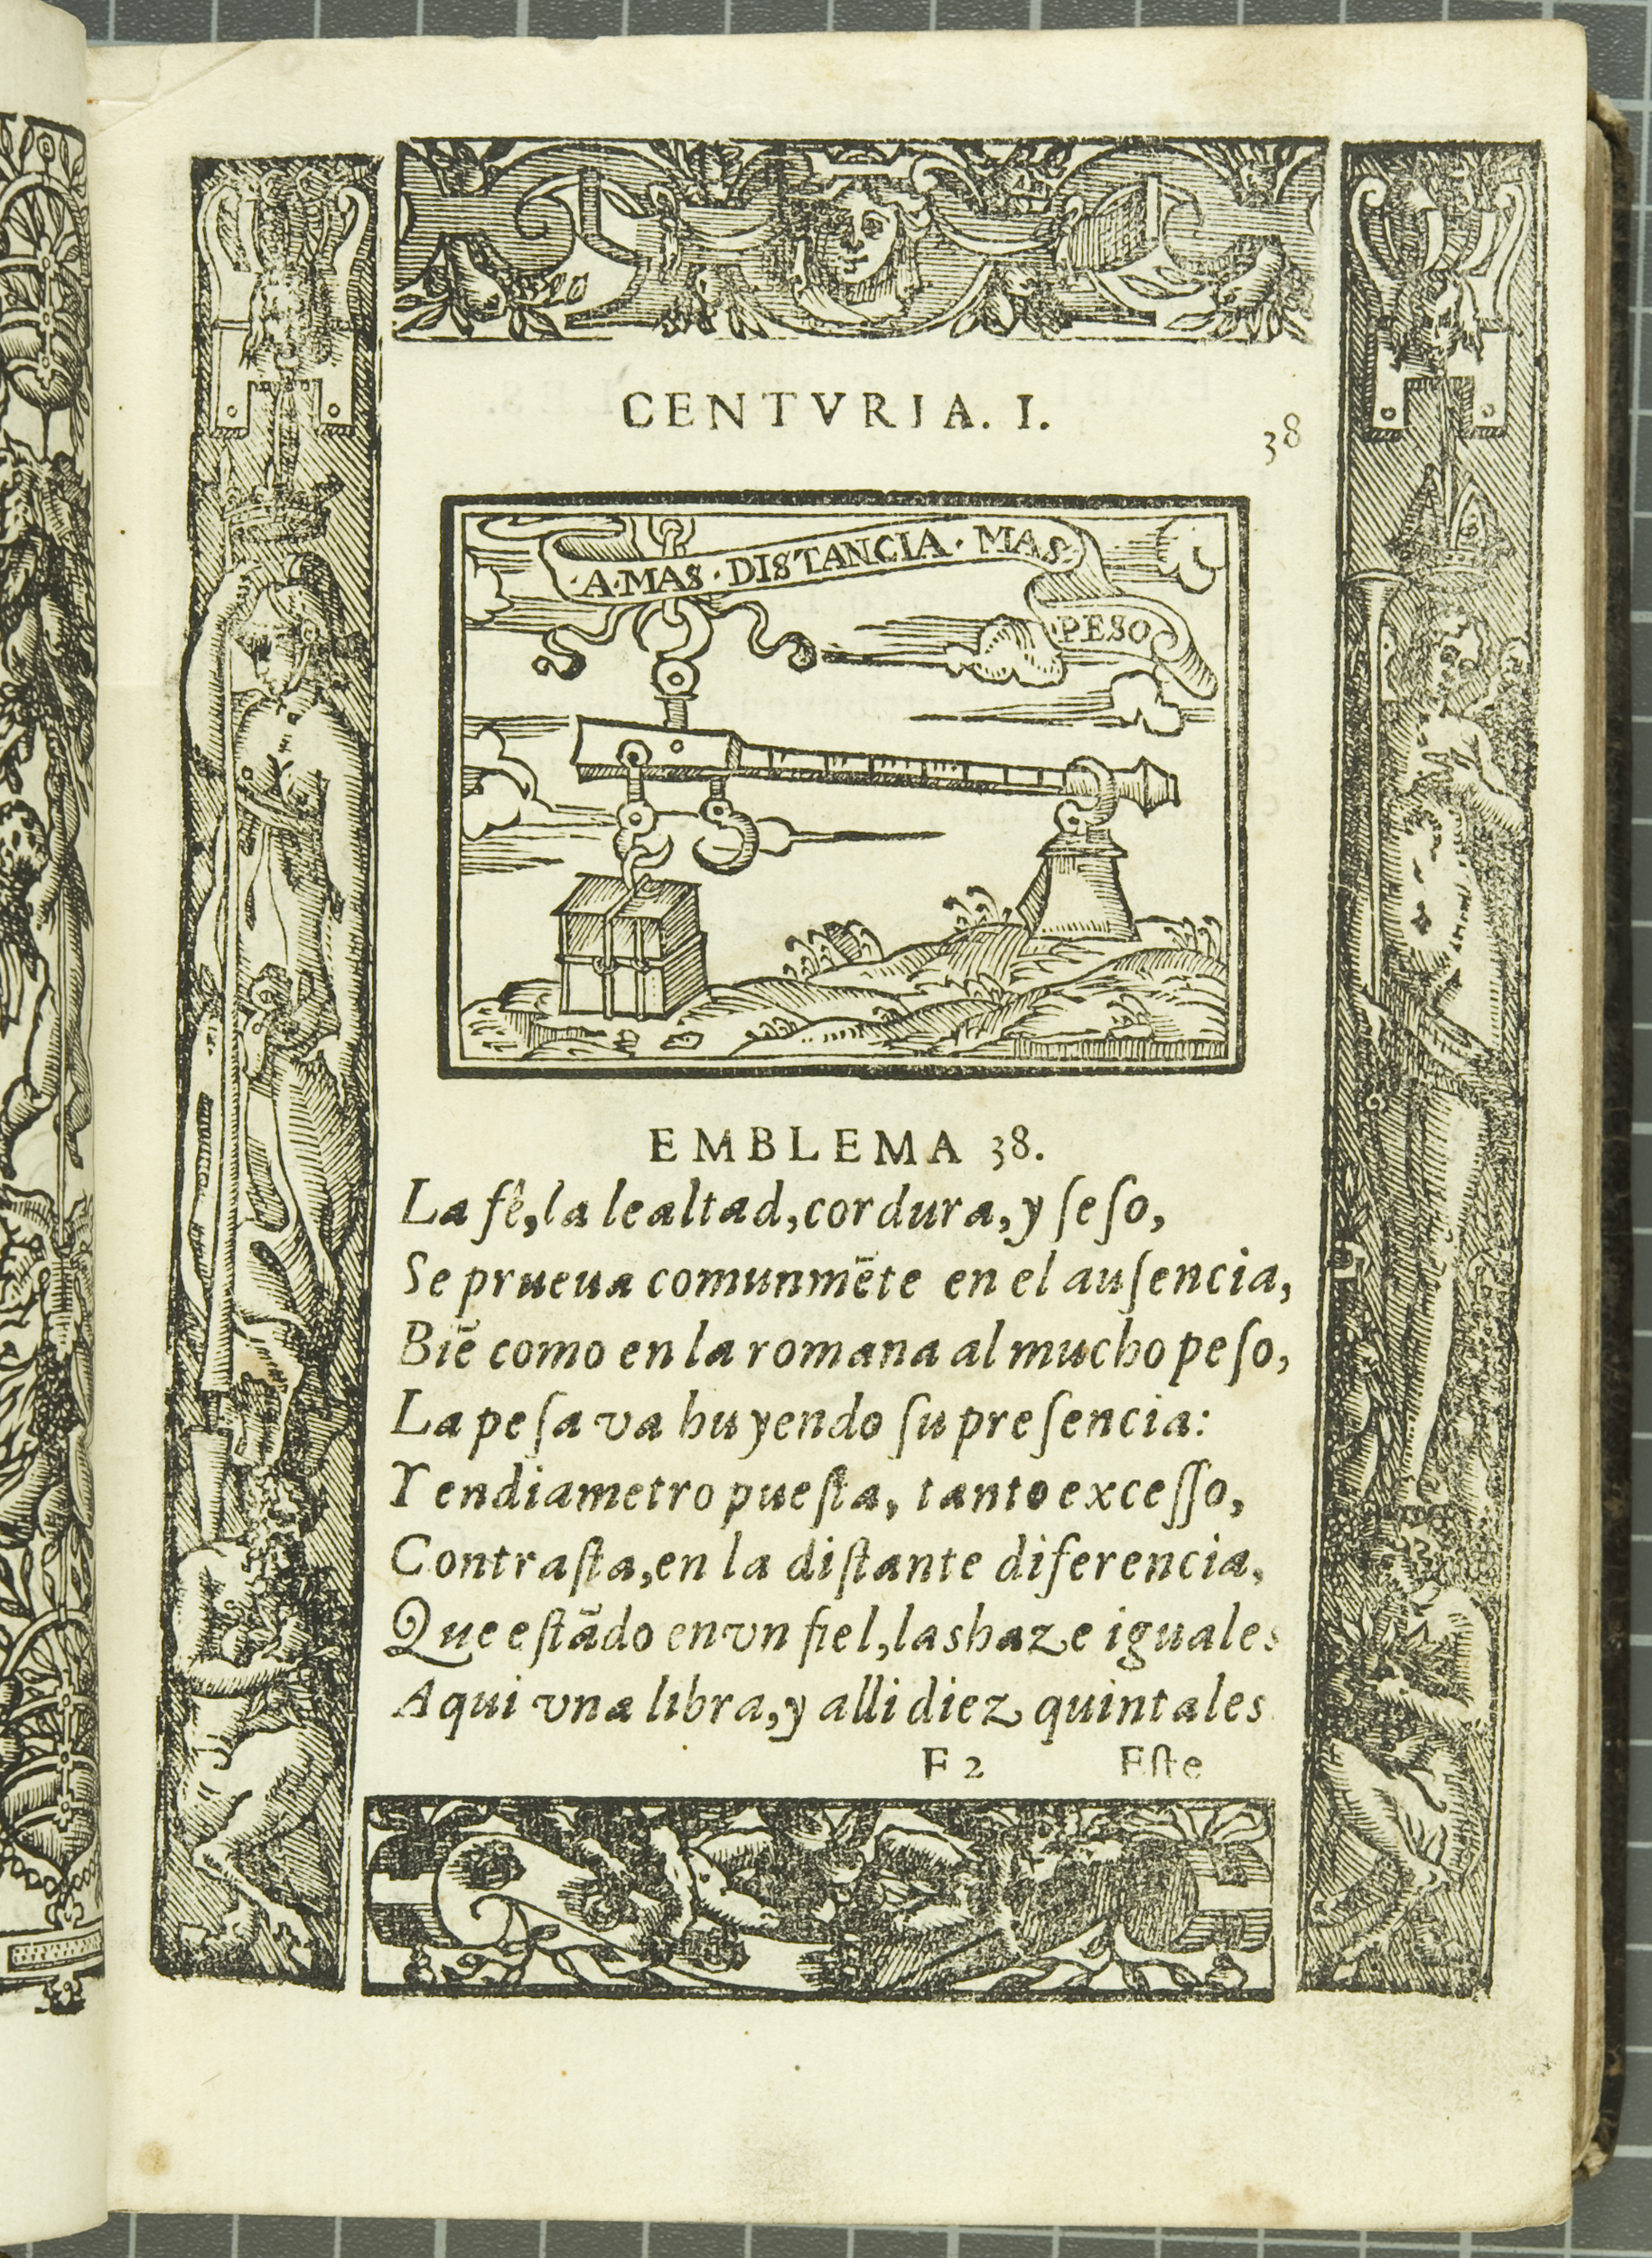 Emblem 38: "Amas distancia mas peso" (roughly translated to: Distance makes love stronger), from Covarrubias’s Emblemas morales (1610).